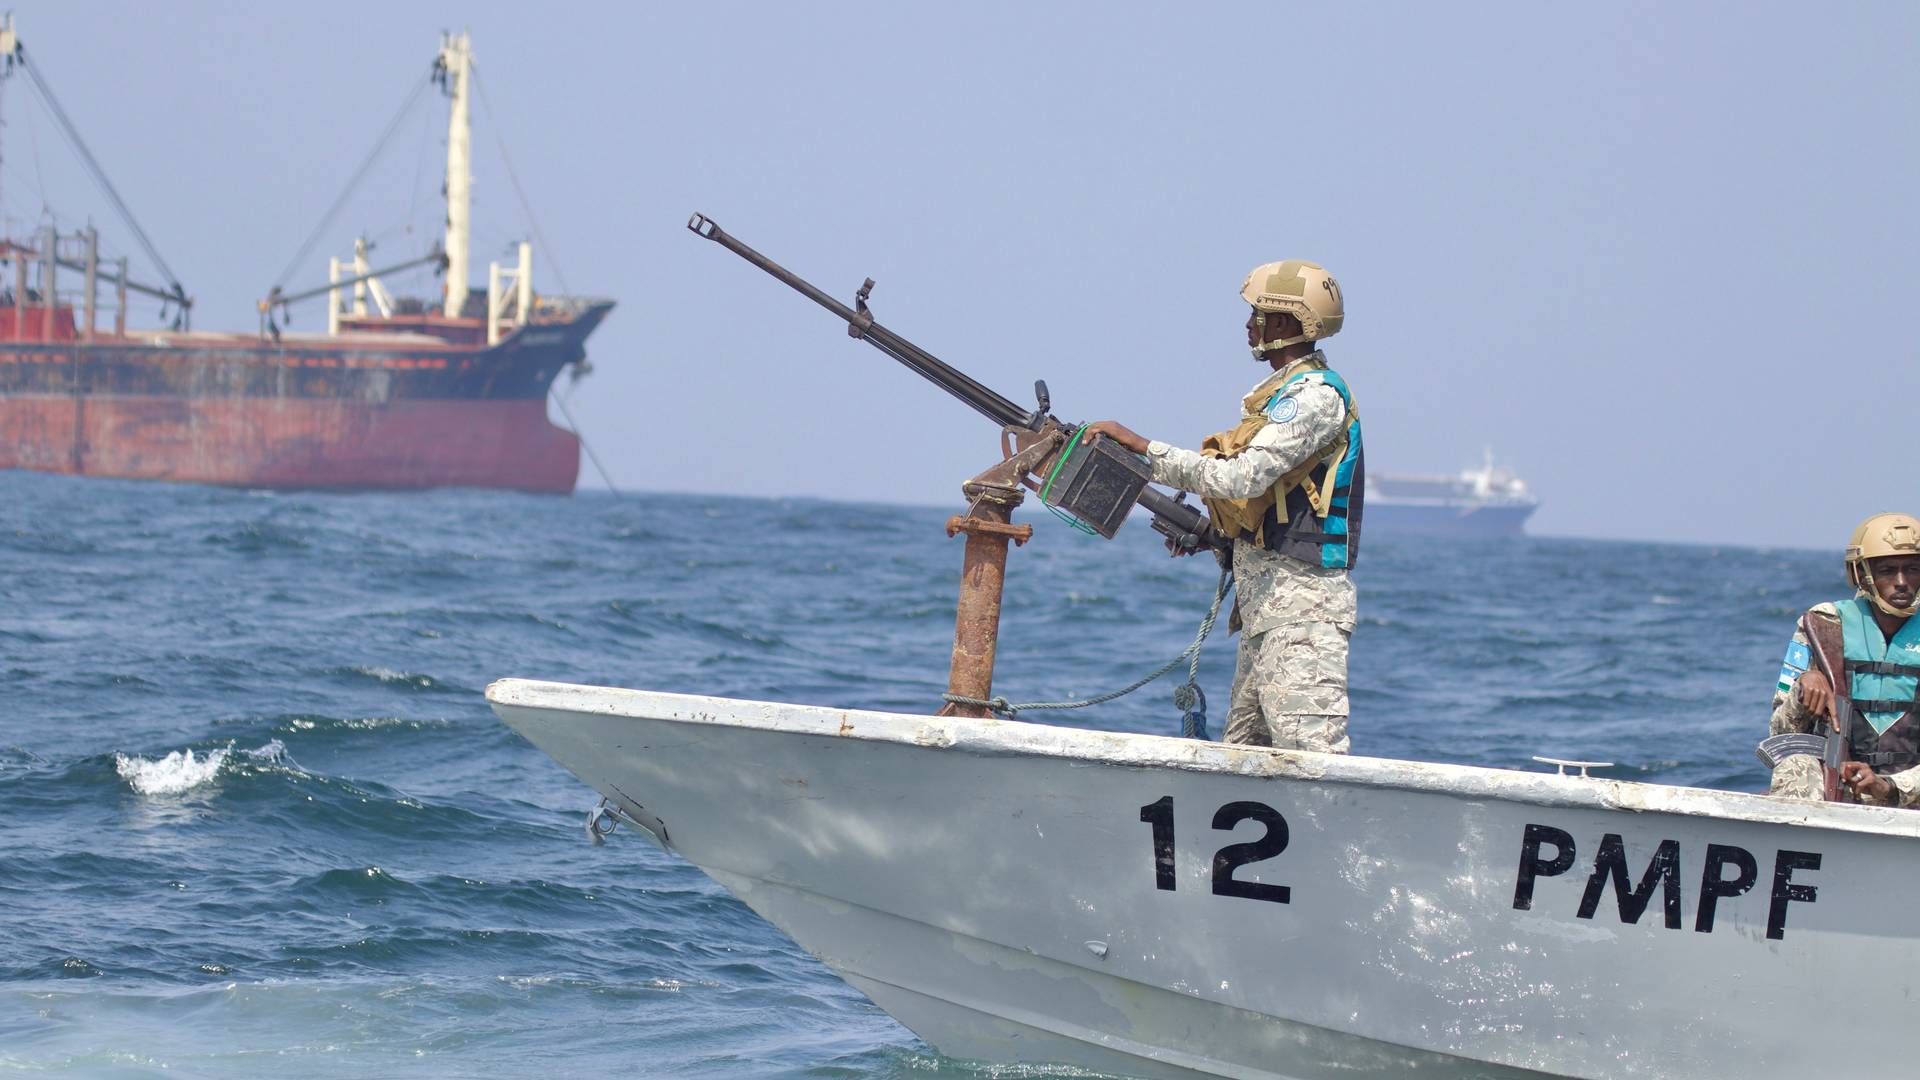 UK Maritime Trade Operations, UKMTO, writes on its website that a ship has been boarded 600 nautical miles from Mogadishu, the capital of Somalia.